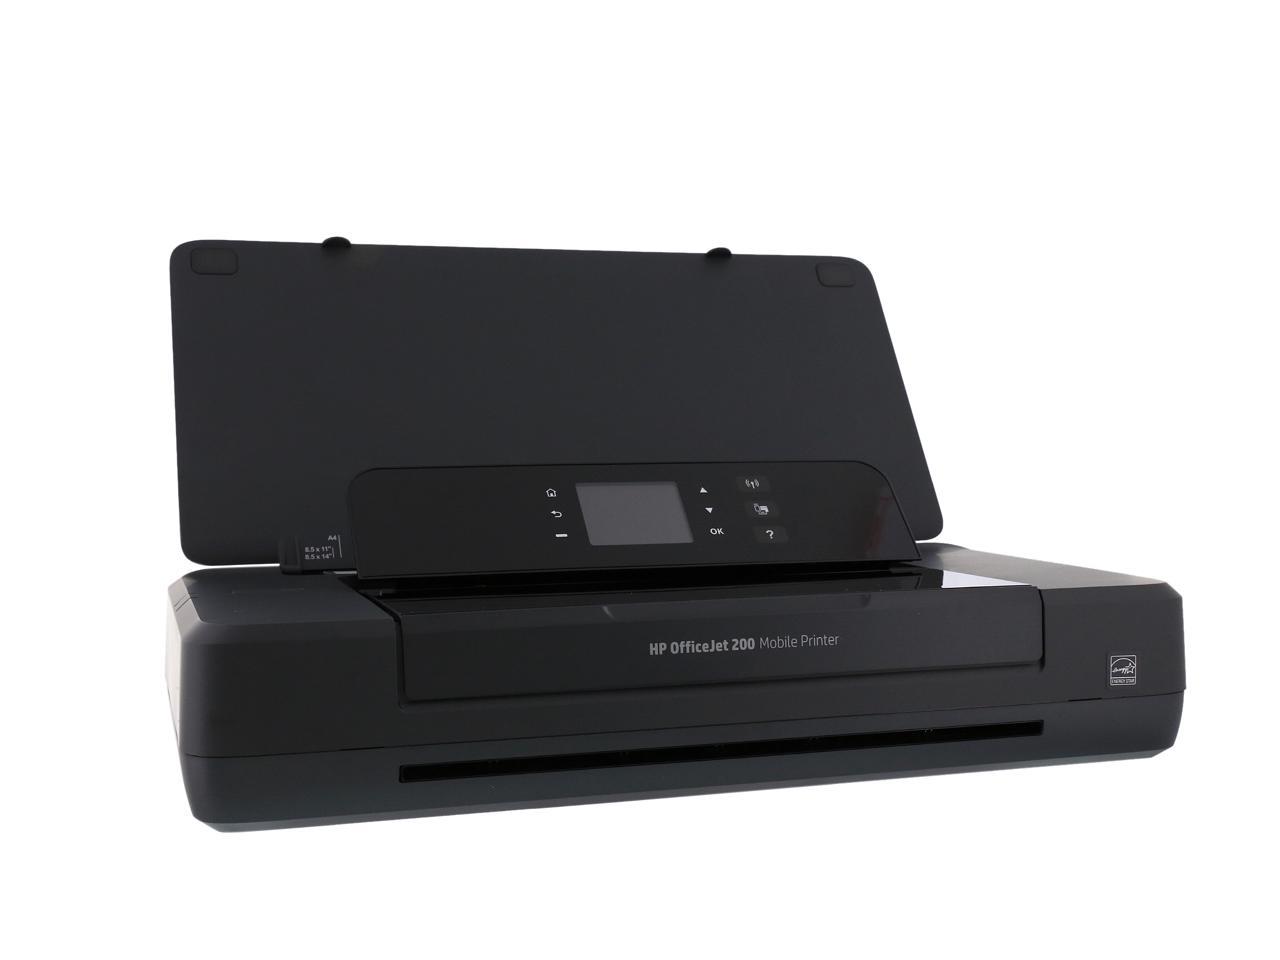 Hp Officejet 200 Mobile Series Printer Driver - Hp Officejet 200 Mobile Series Printer Driver Hp Officejet 200 Mobile Printer Review And How To Set Up Youtube Droiddevice Com Provides A Link Download The Latest Driver Firmware And Software : Select download to install the recommended printer software to complete setup.